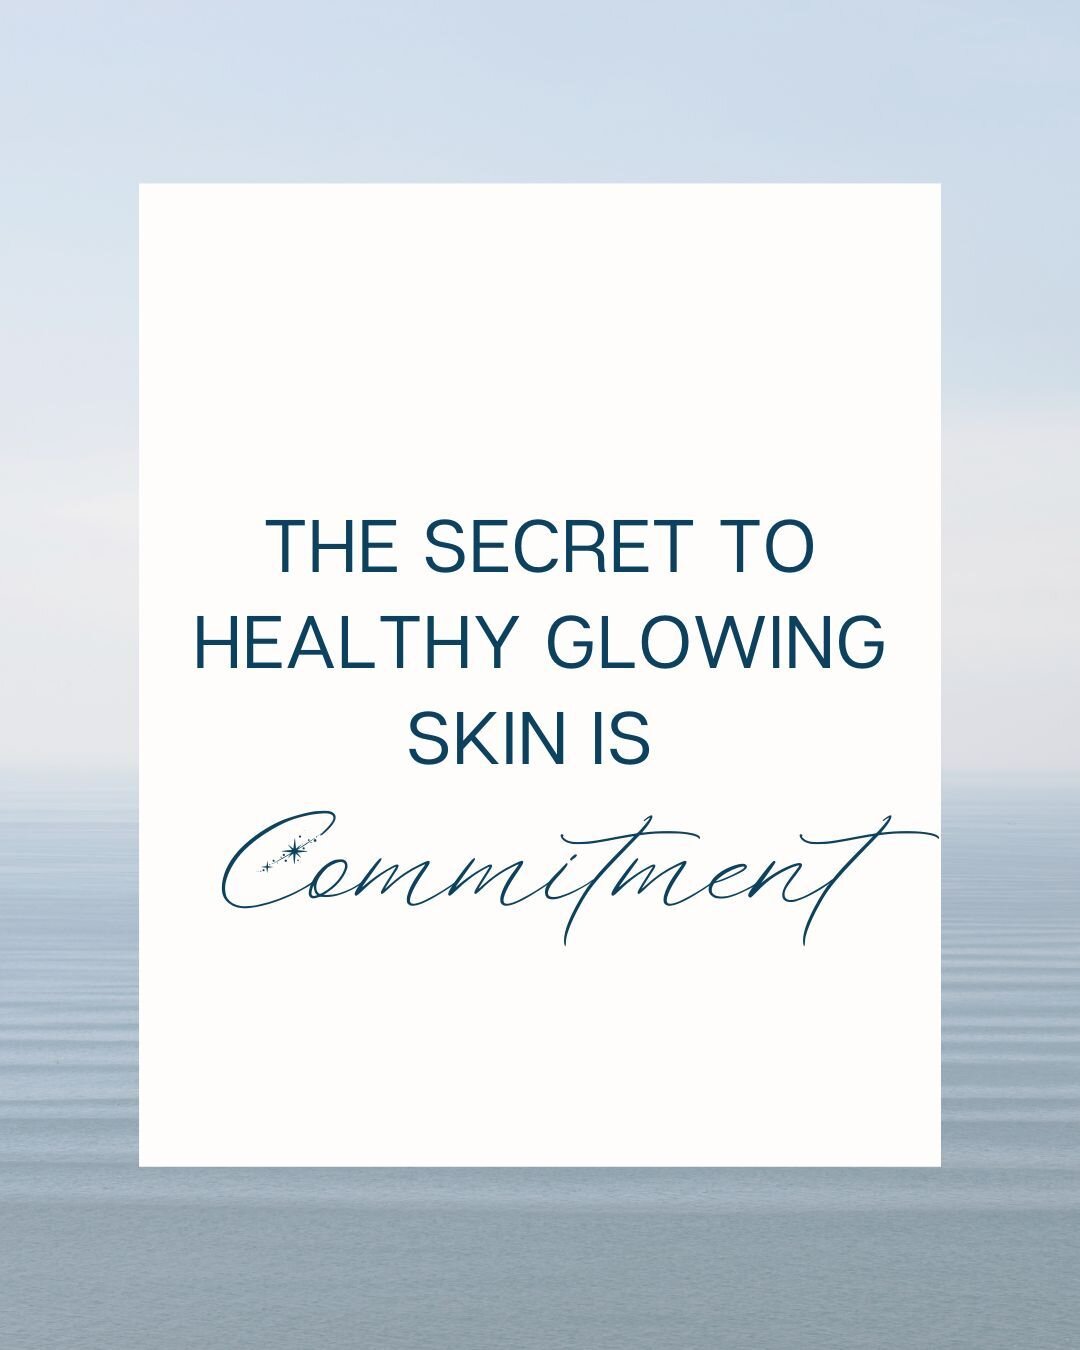 When it comes to skin health prevention is easier than correction. Your skin is vital for protecting your organs, it deserves the same care and commitment that you give to the health of all the other parts of your body